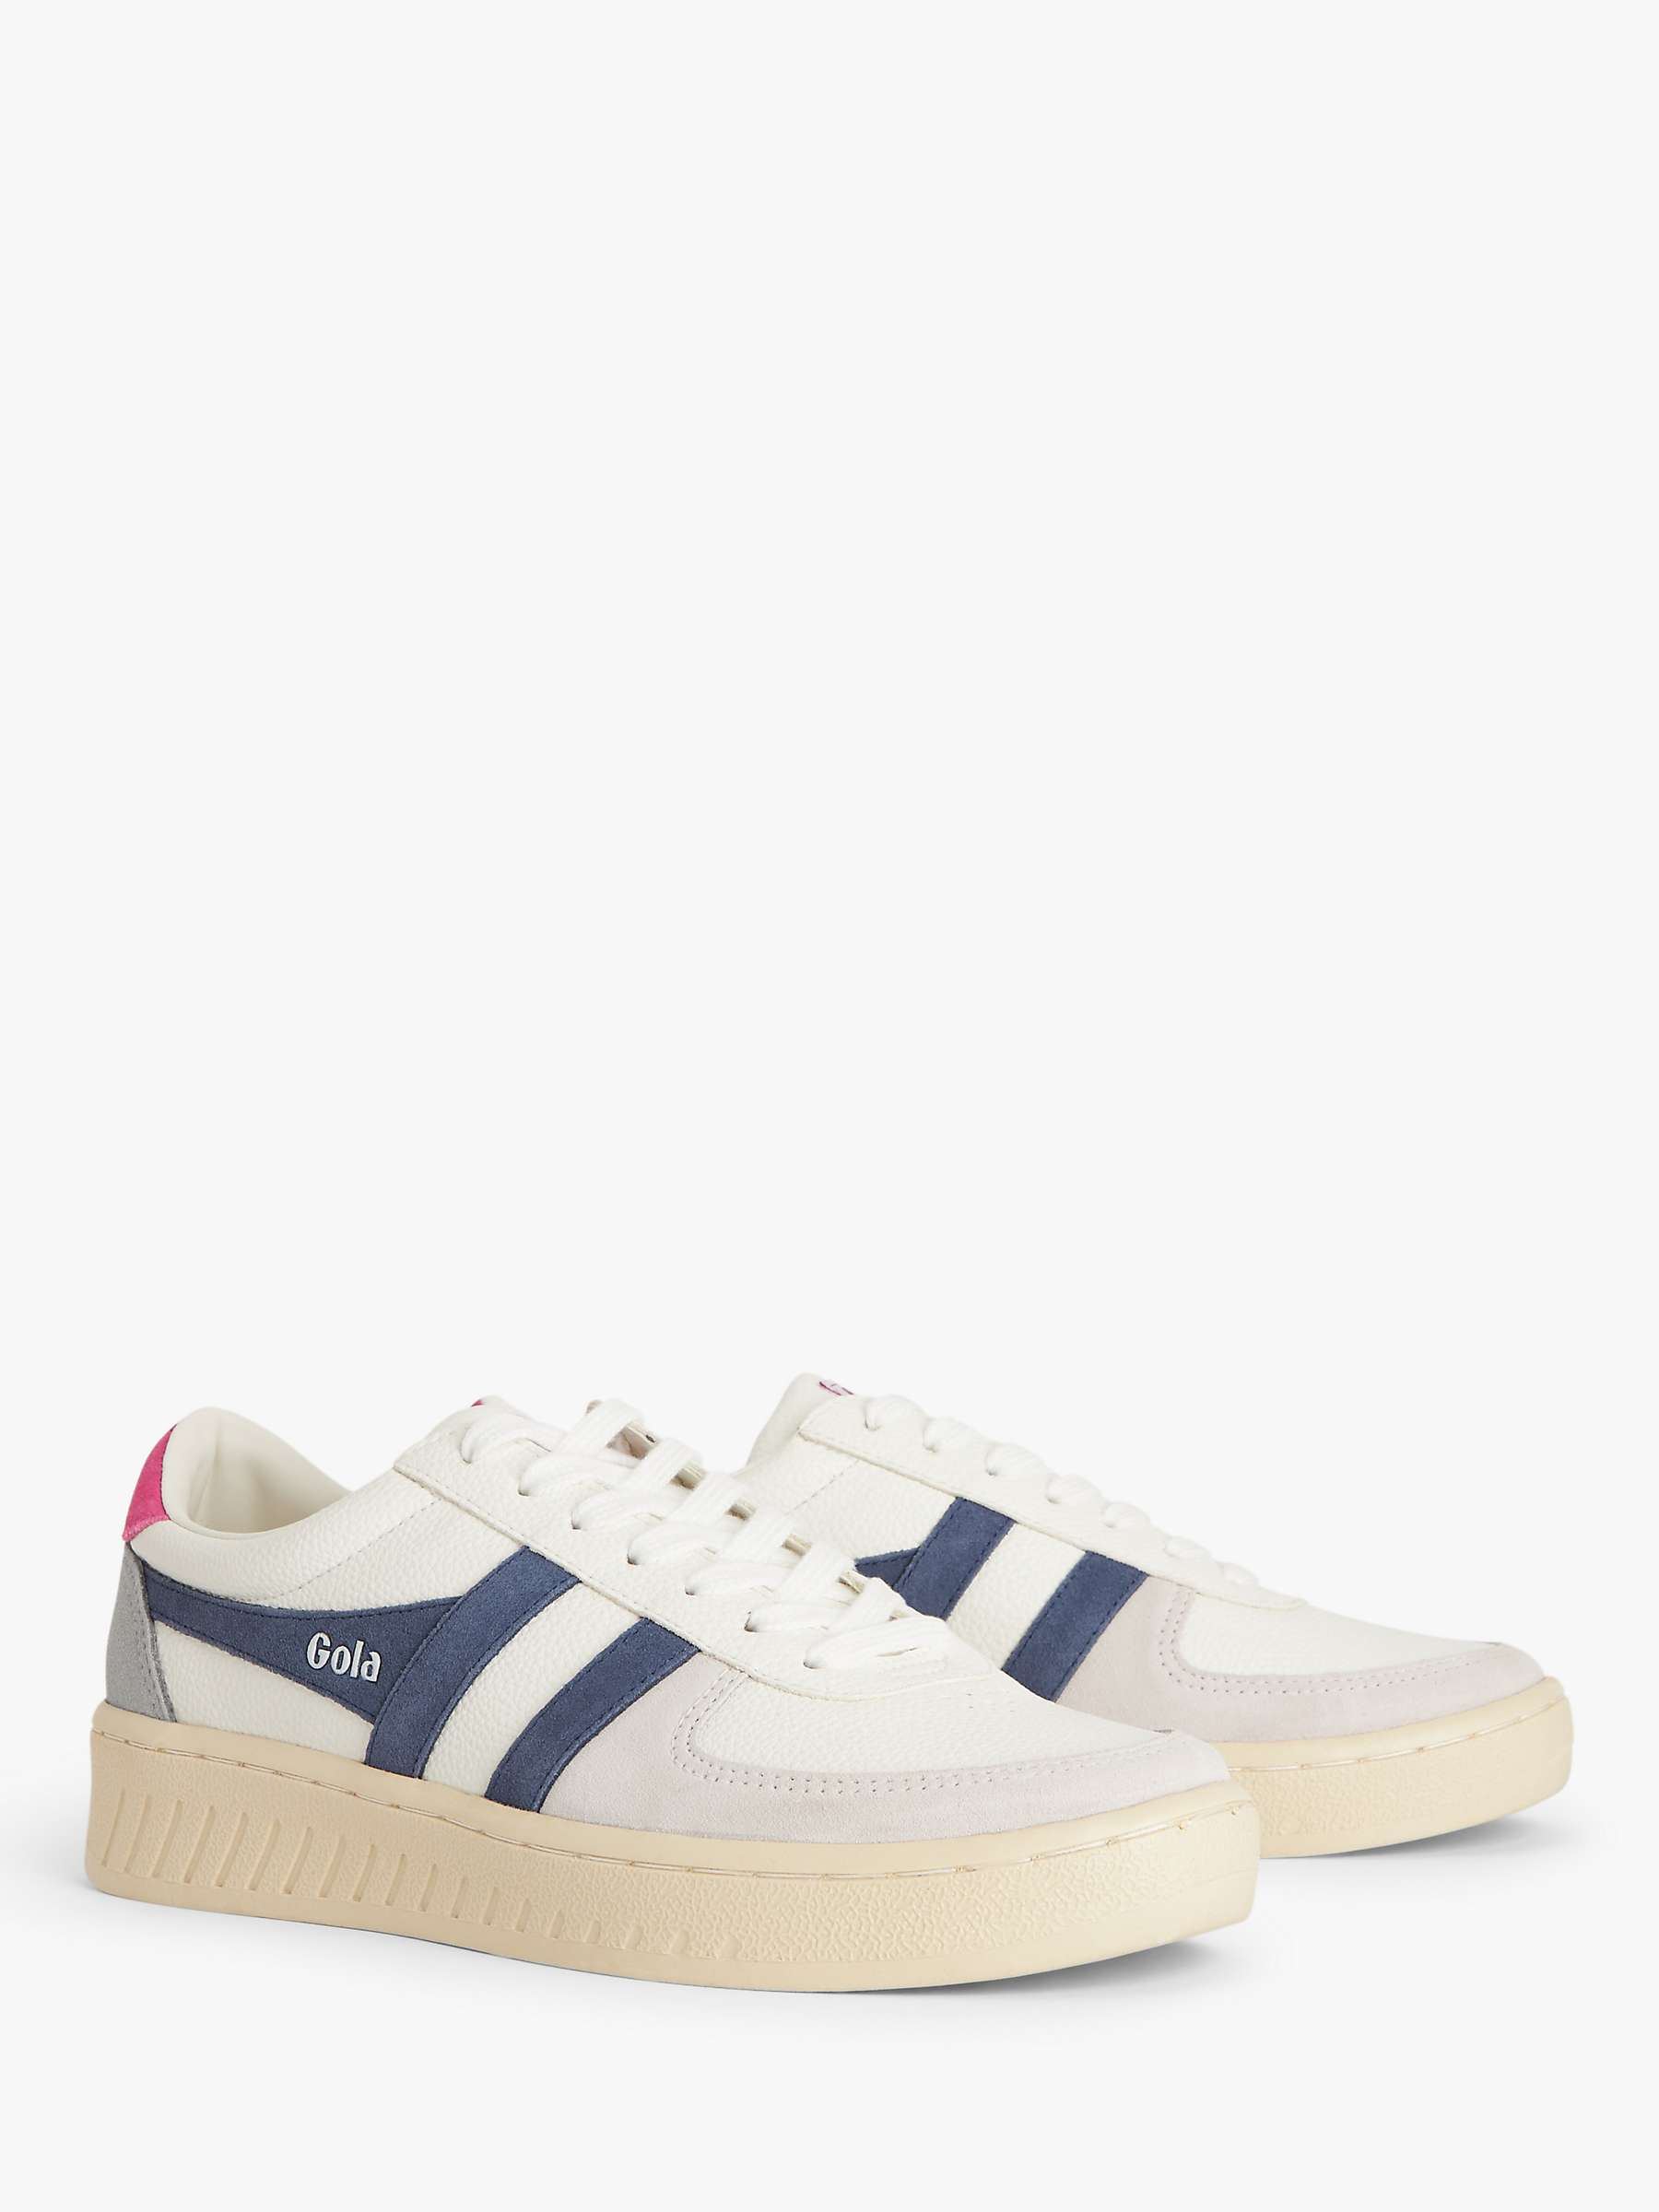 Buy Gola Grandslam Leather Trainers Online at johnlewis.com